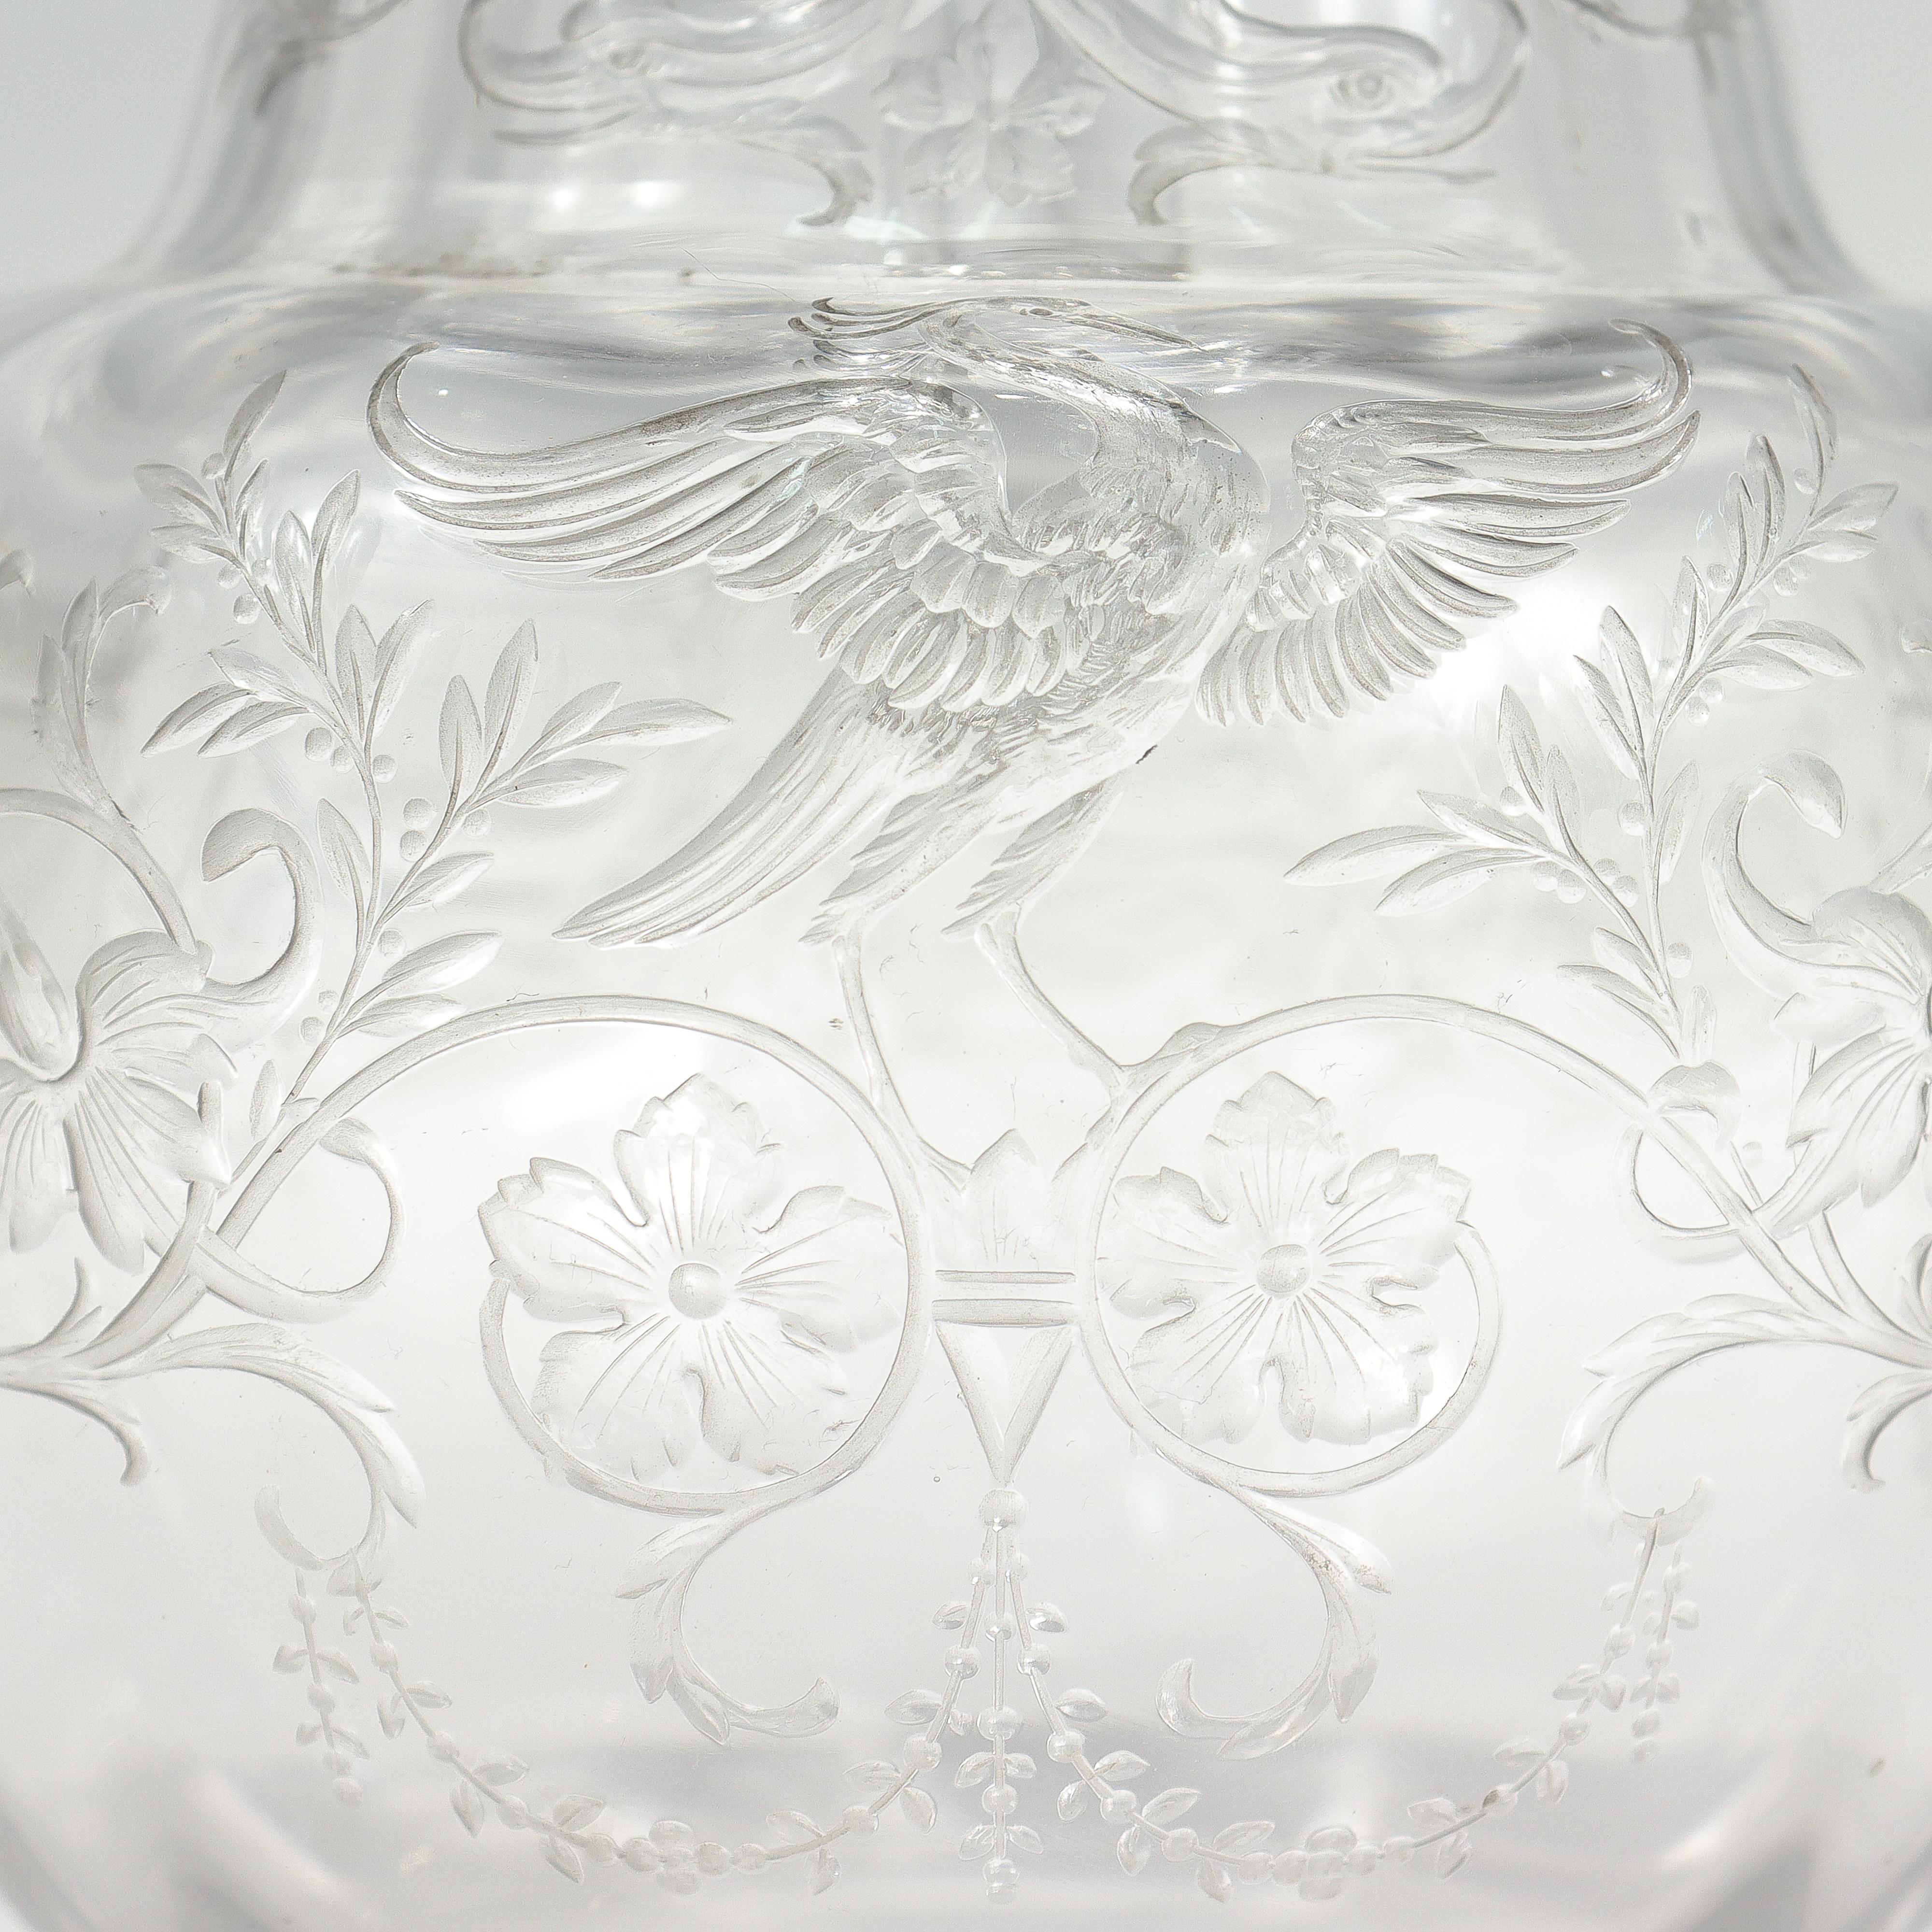 Antique Cut Glass Pitcher with Birds & Phoenix Attributed to Stevens & Williams For Sale 4